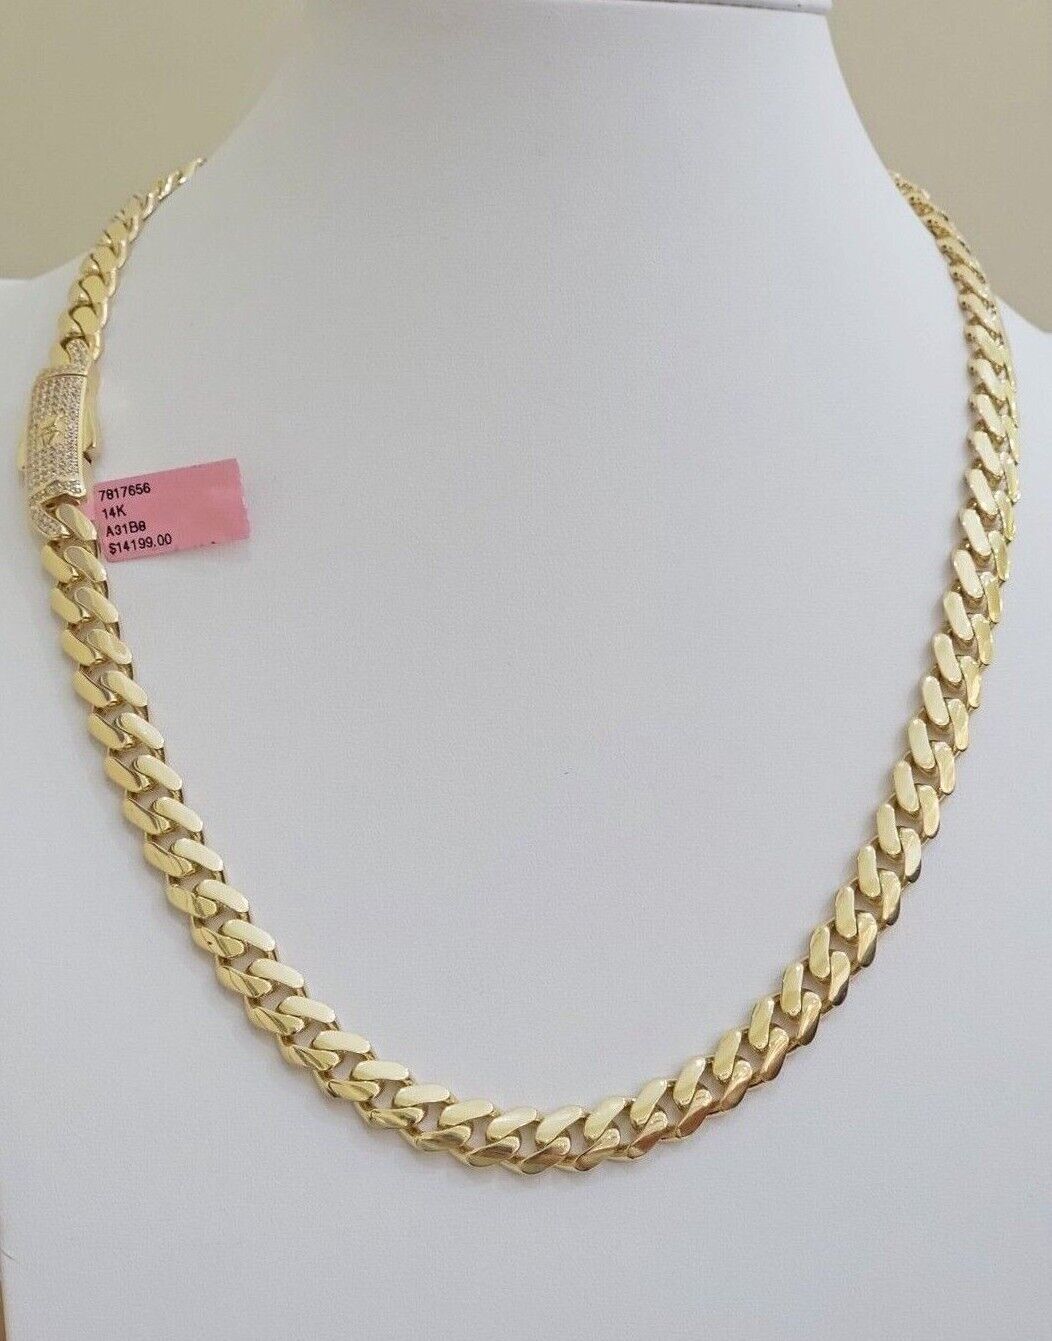 Real 14k Yellow Gold Monaco Chain Necklace  20" 22'' 24'' 26" Inch 9mm 14kt SALE